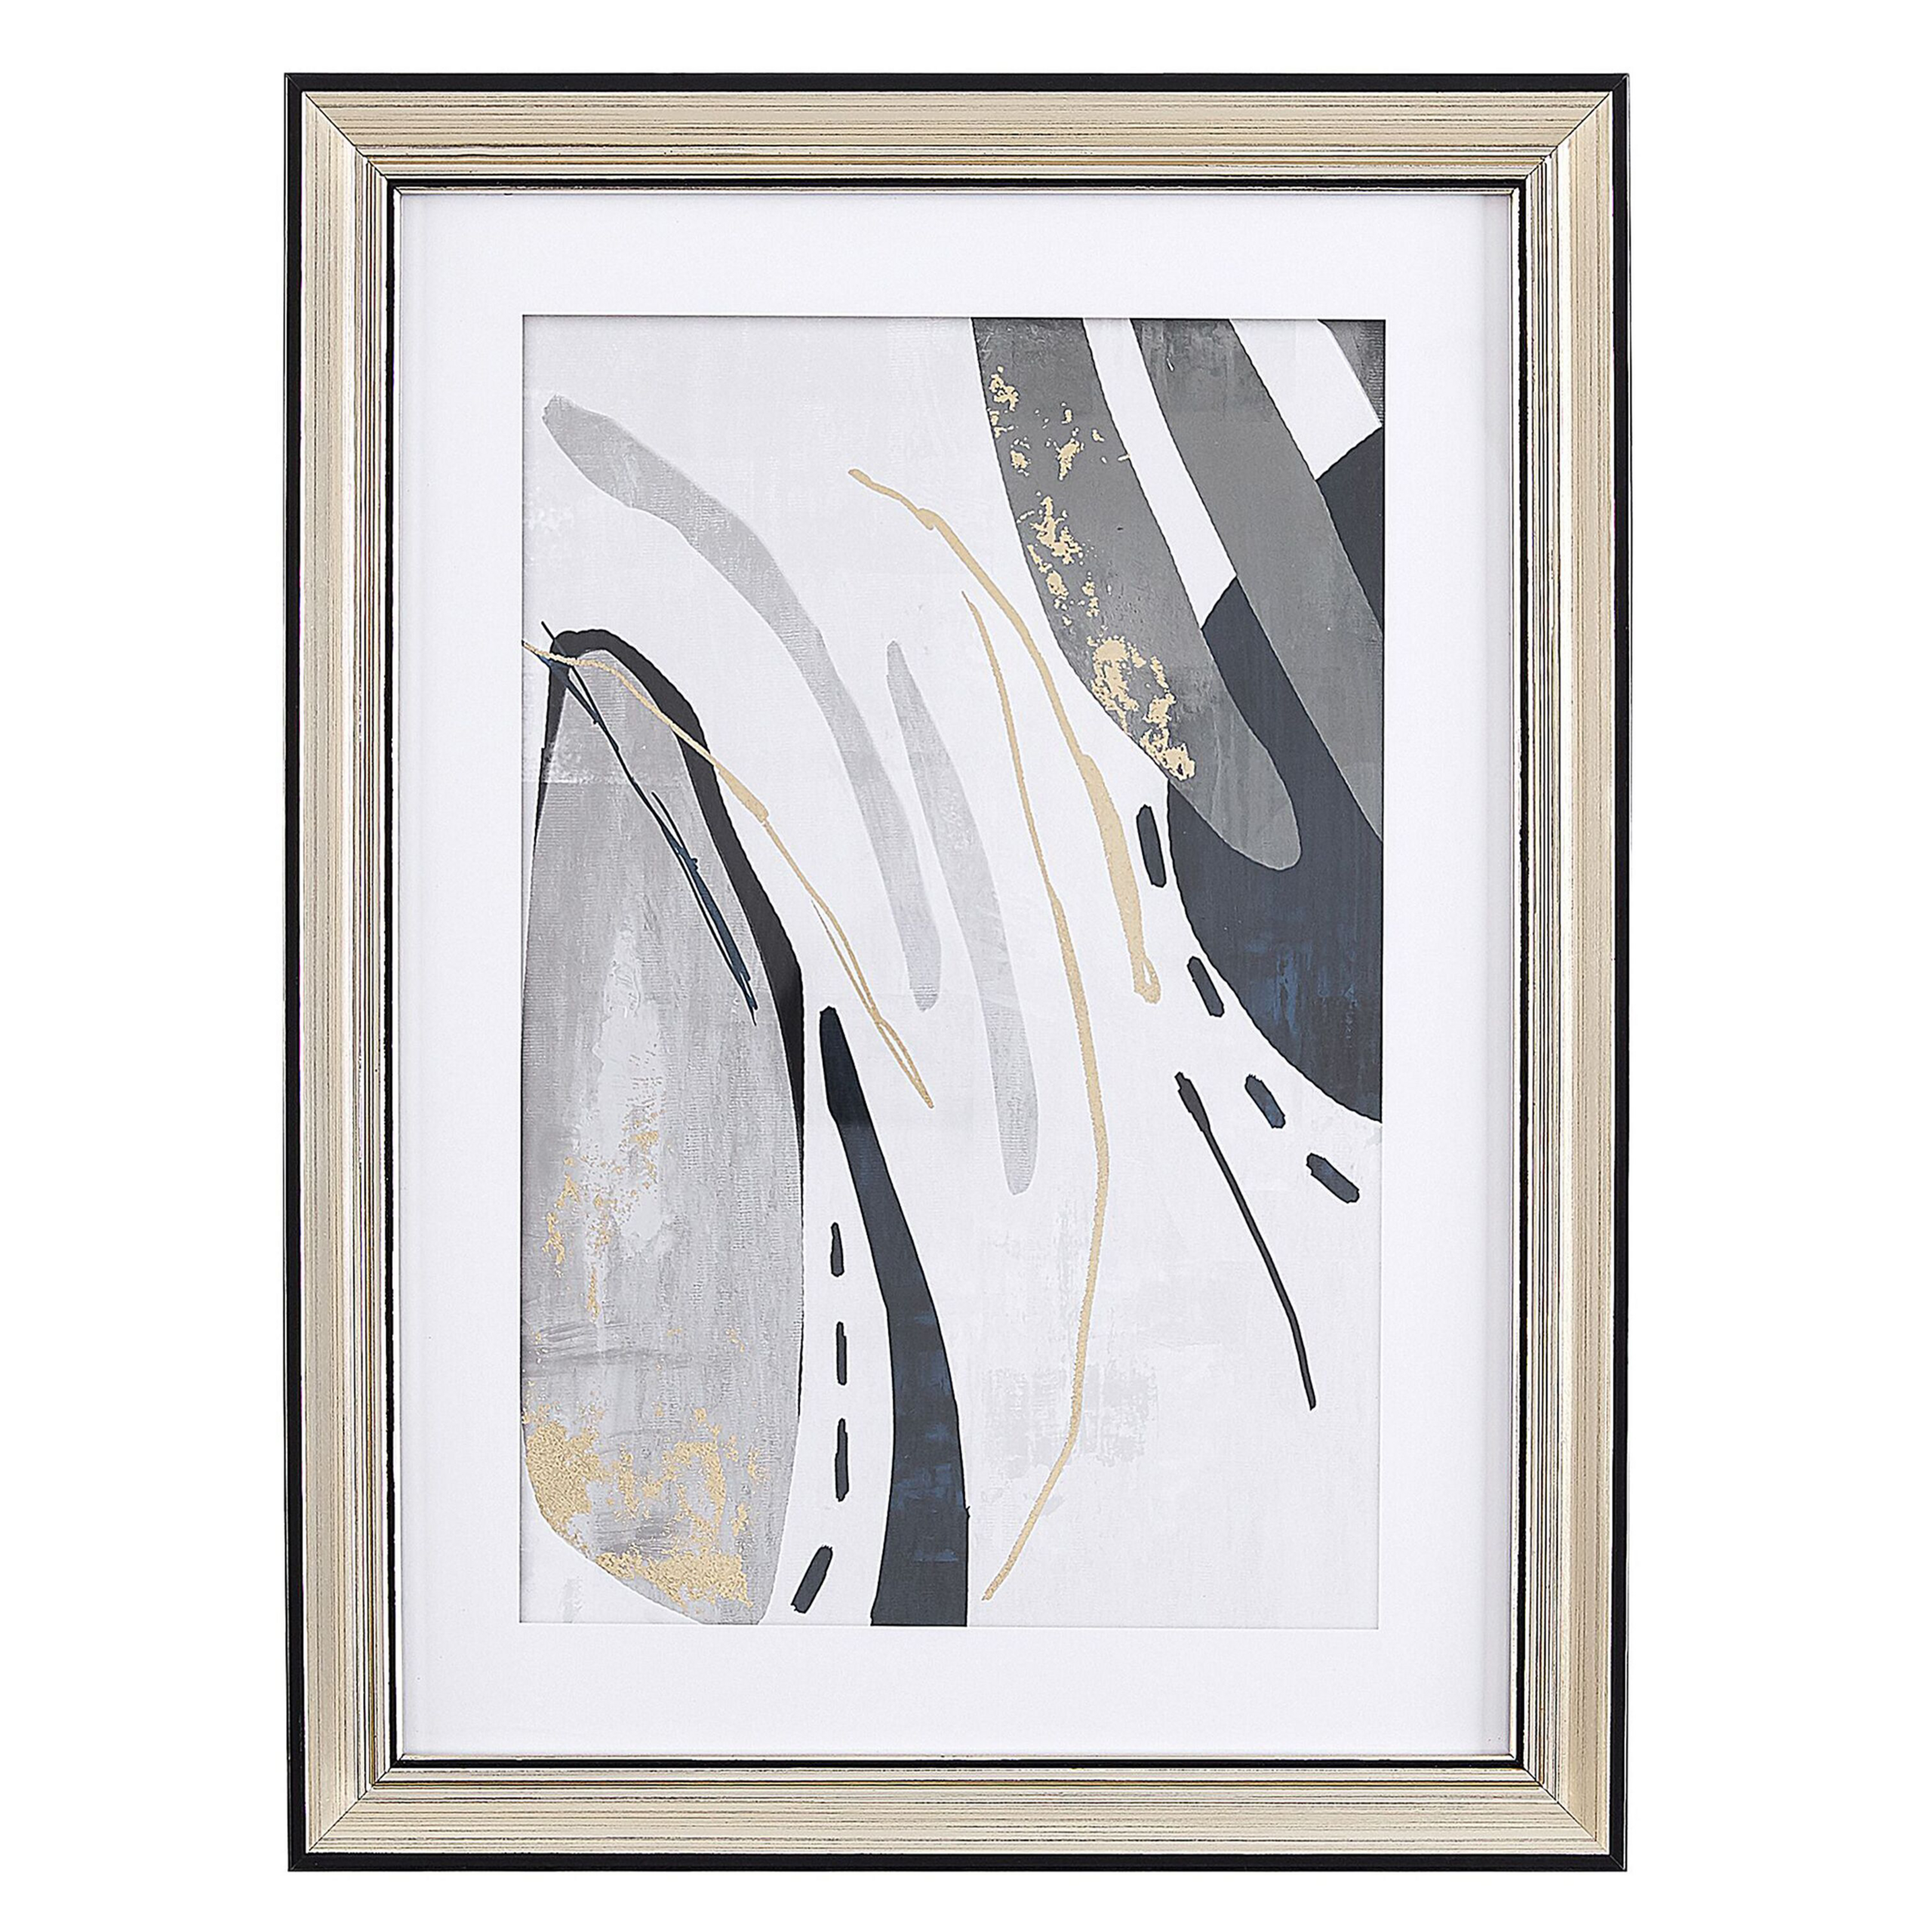 Beliani Framed Wall Art Grey Print Brass Frame 30 x 40 cm Passe-Partout Abstract Simple Minimalist Material:Paper Size:5x40x30